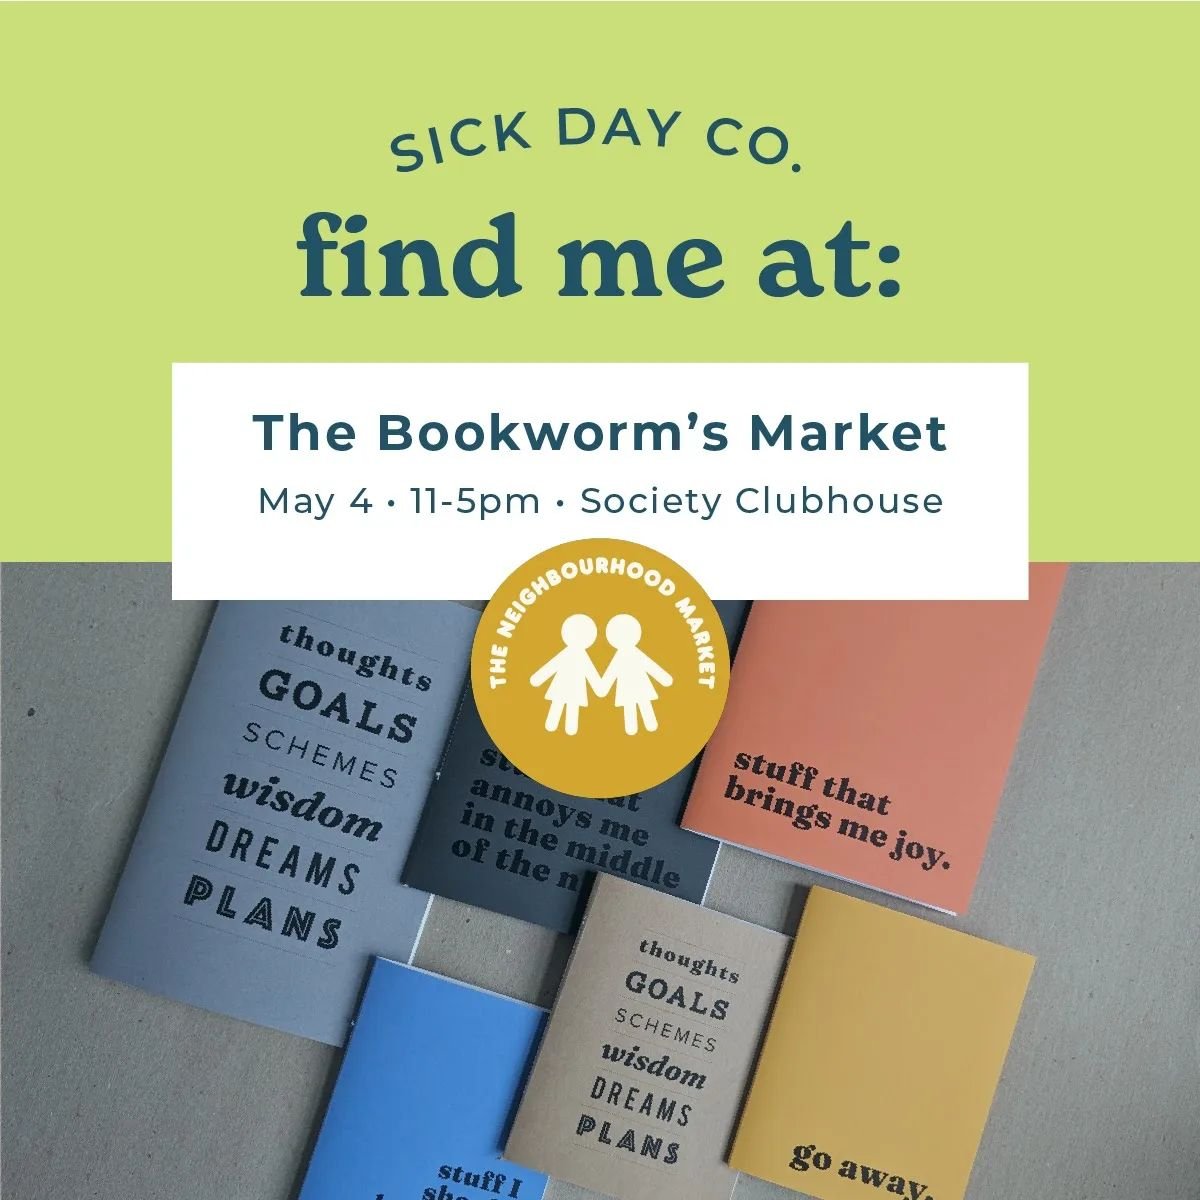 TOMORROW! 
I'll be at the Bookworm's Market tomorrow from 11-5pm at society clubhouse kicking off market season. Get your cozy eye pillows, heat packs, notebooks, totes, mugs, stickers, and aromatherapy sprays there ✨ can't wait to see you there! 💗